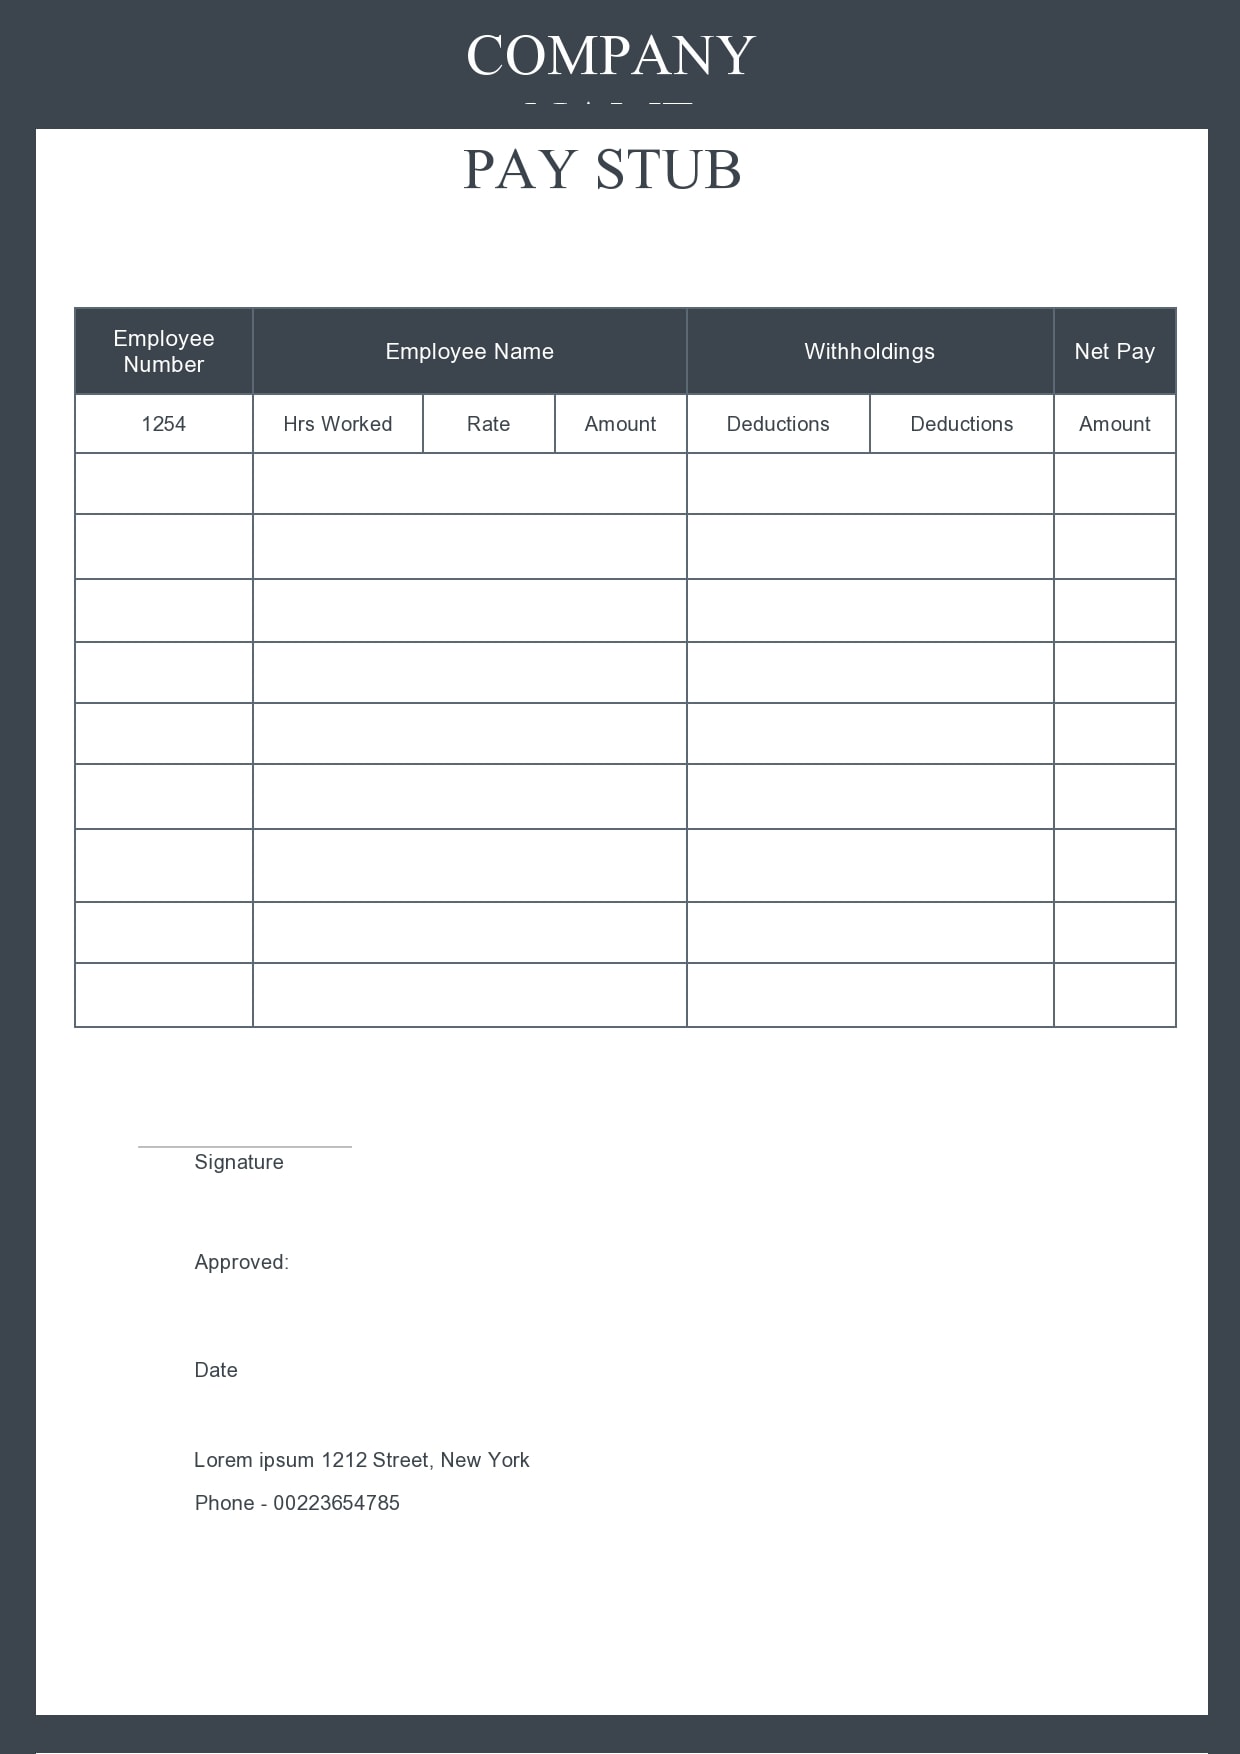 25 Free Pay Stub Templates [Excel, Word] - PrintableTemplates For Blank Pay Stub Template Word